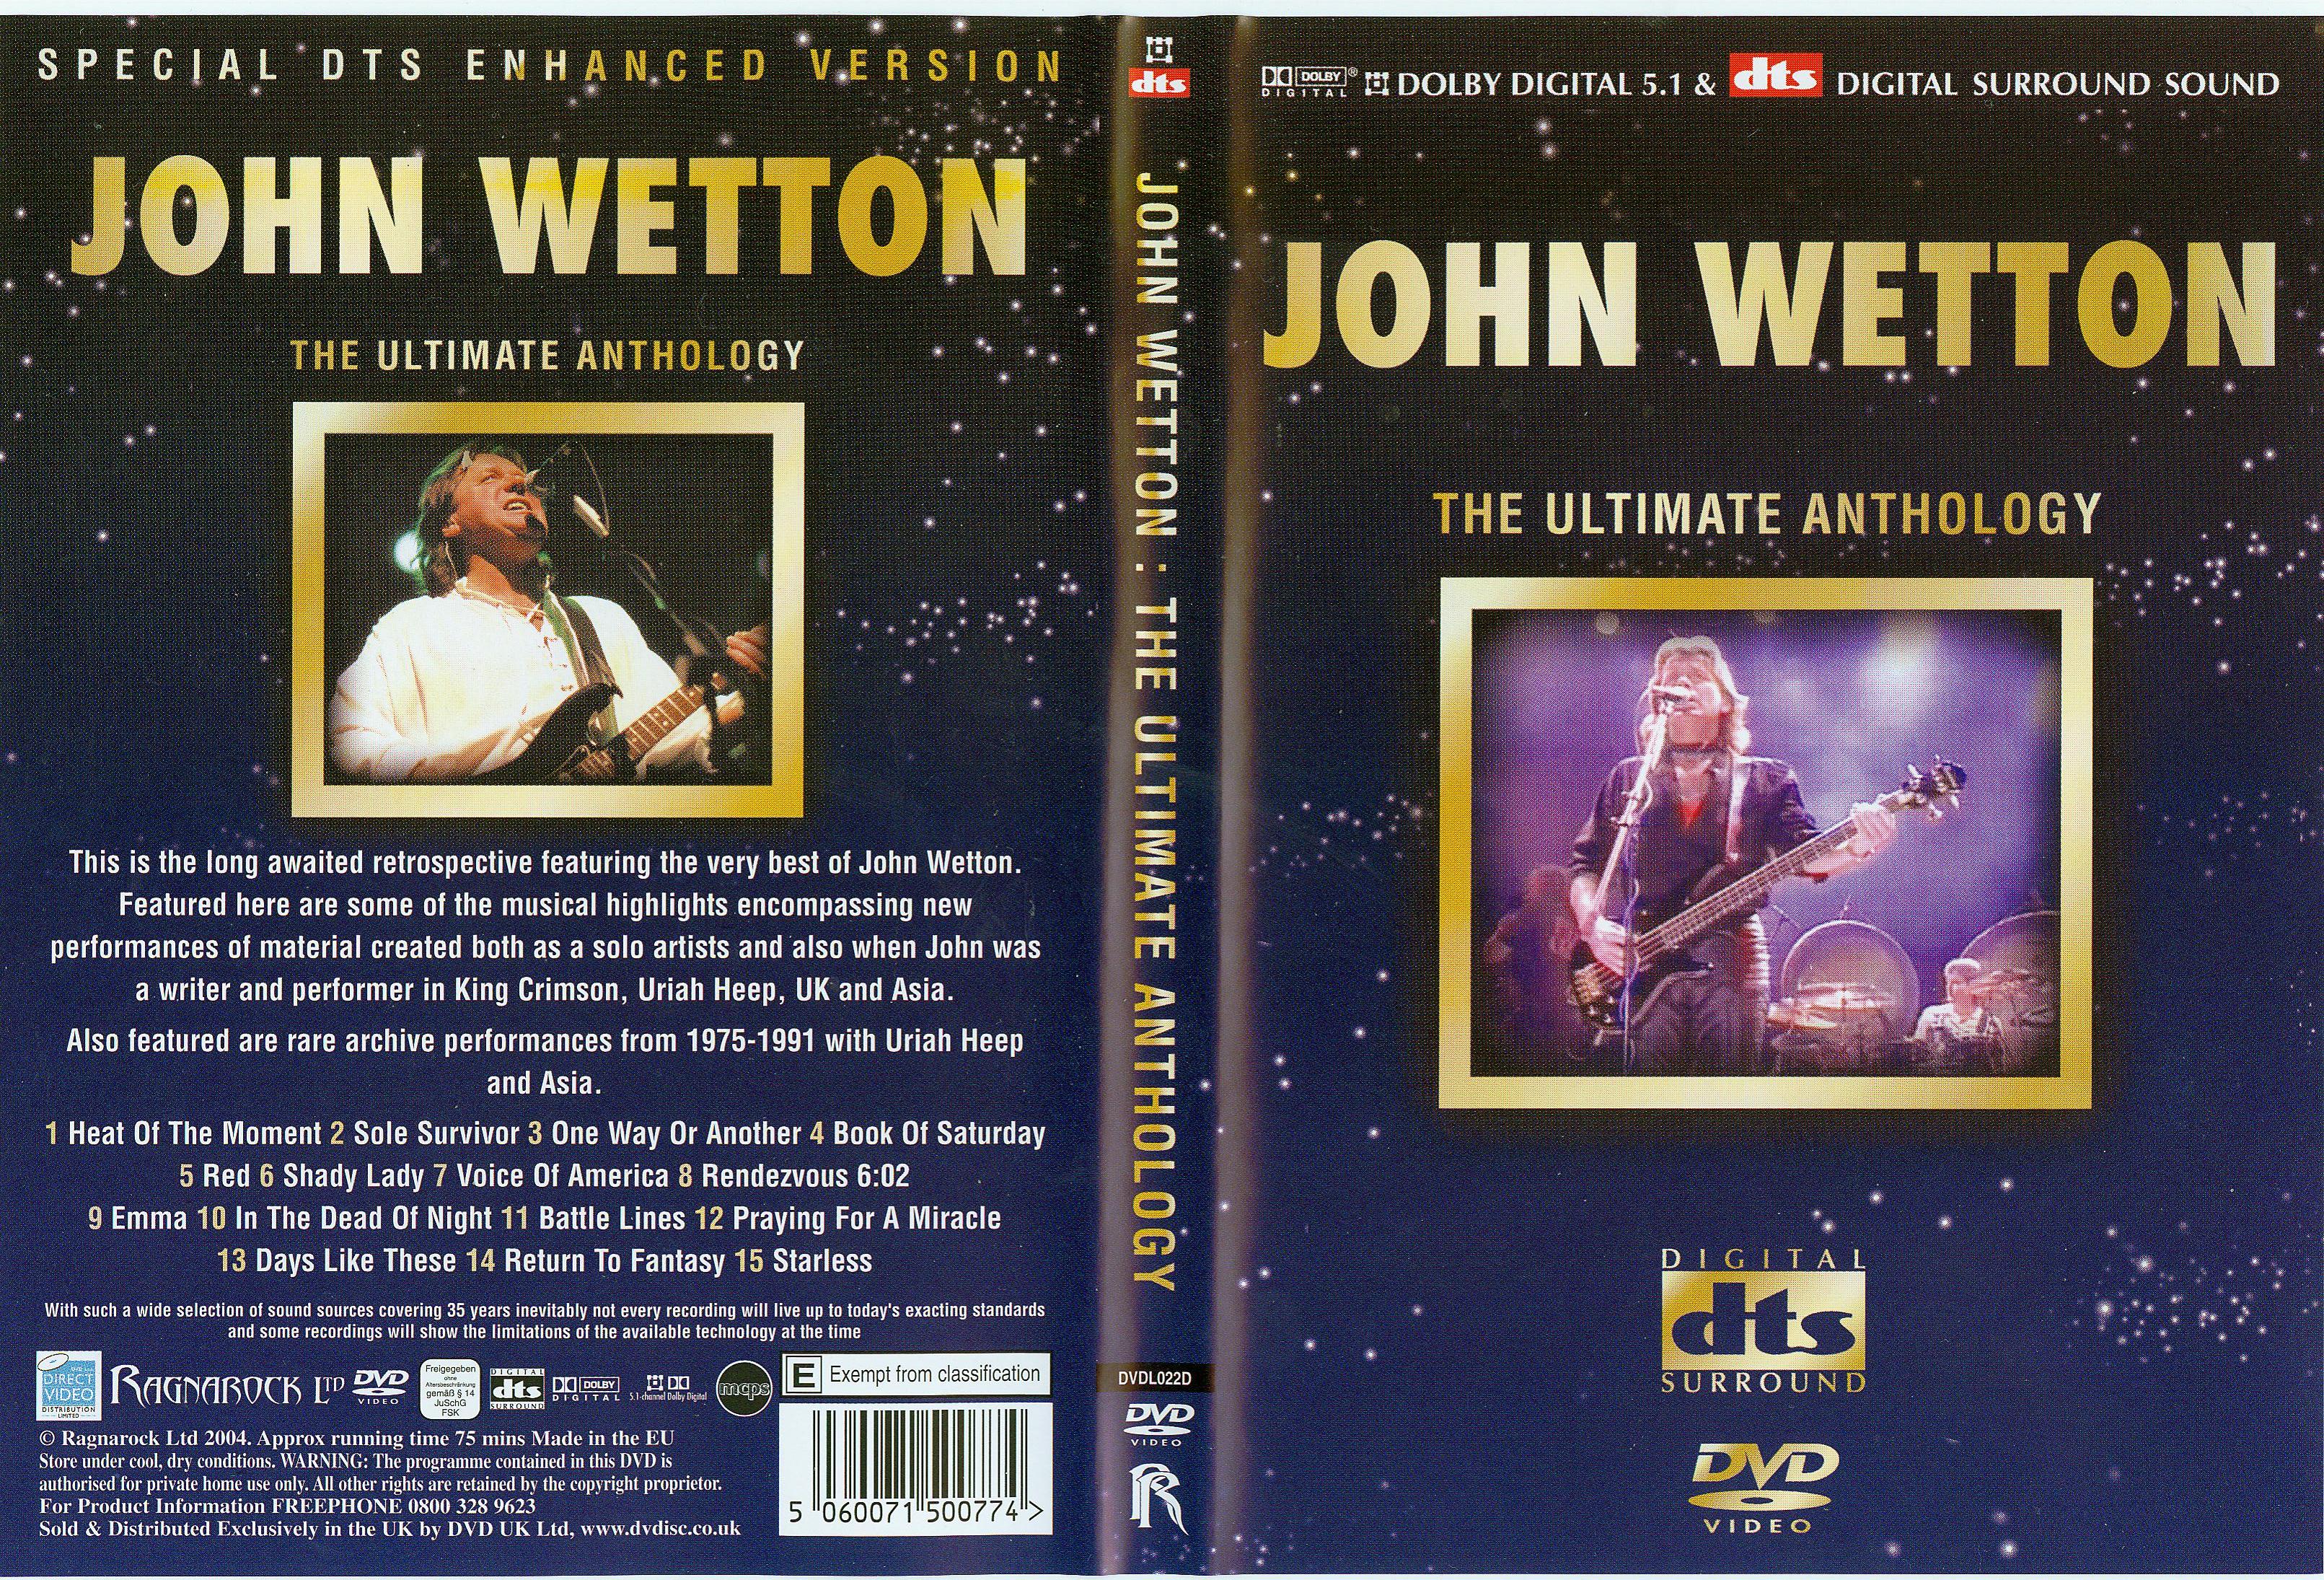 Jaquette DVD John Wetton the ultimate anthology